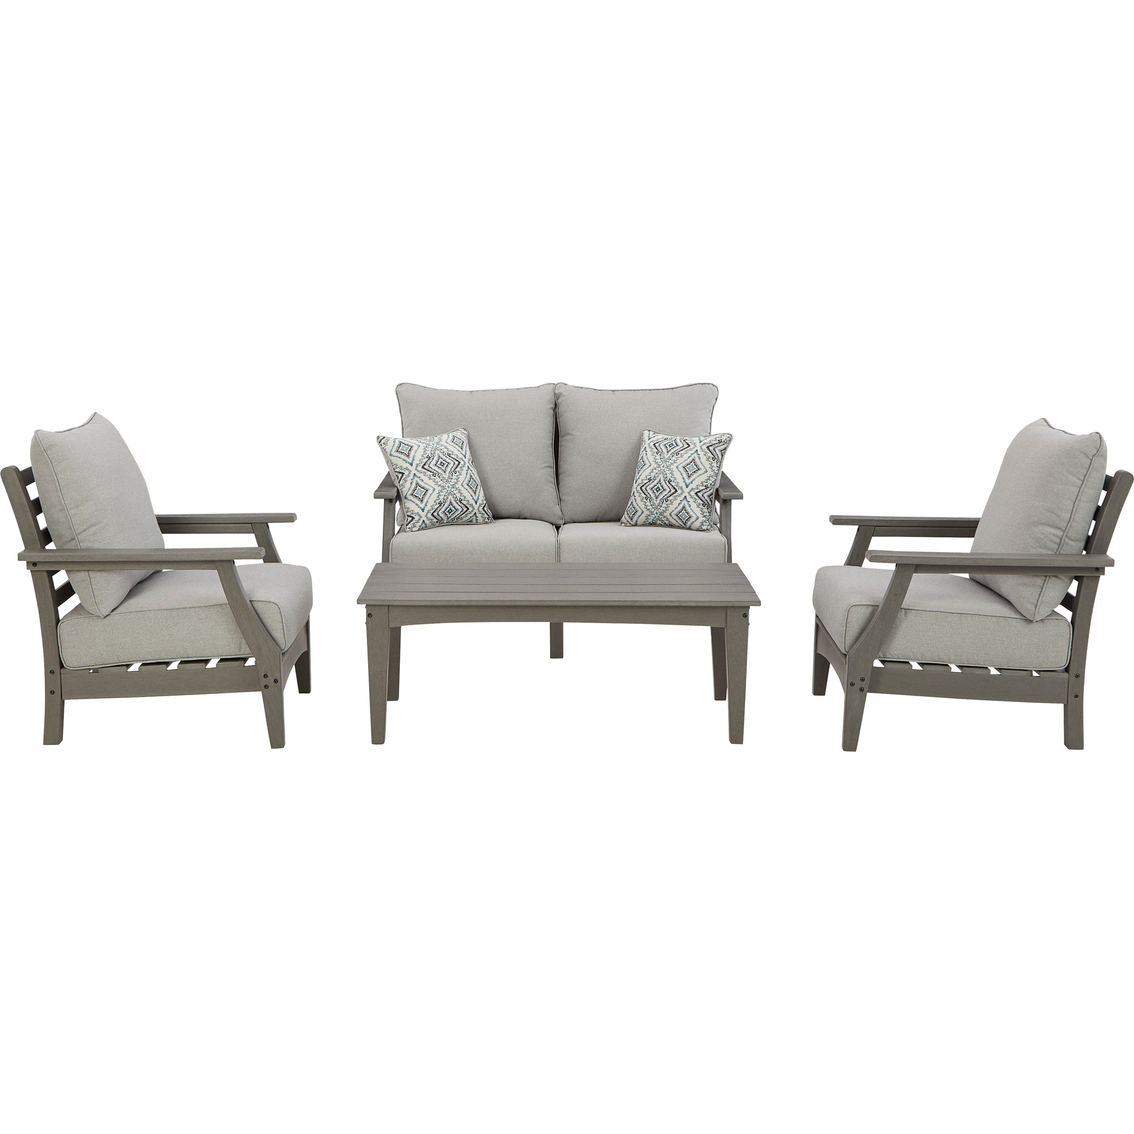 Signature Design by Ashley Visola 4 pc. Outdoor Seating Set with Loveseat - Image 2 of 8